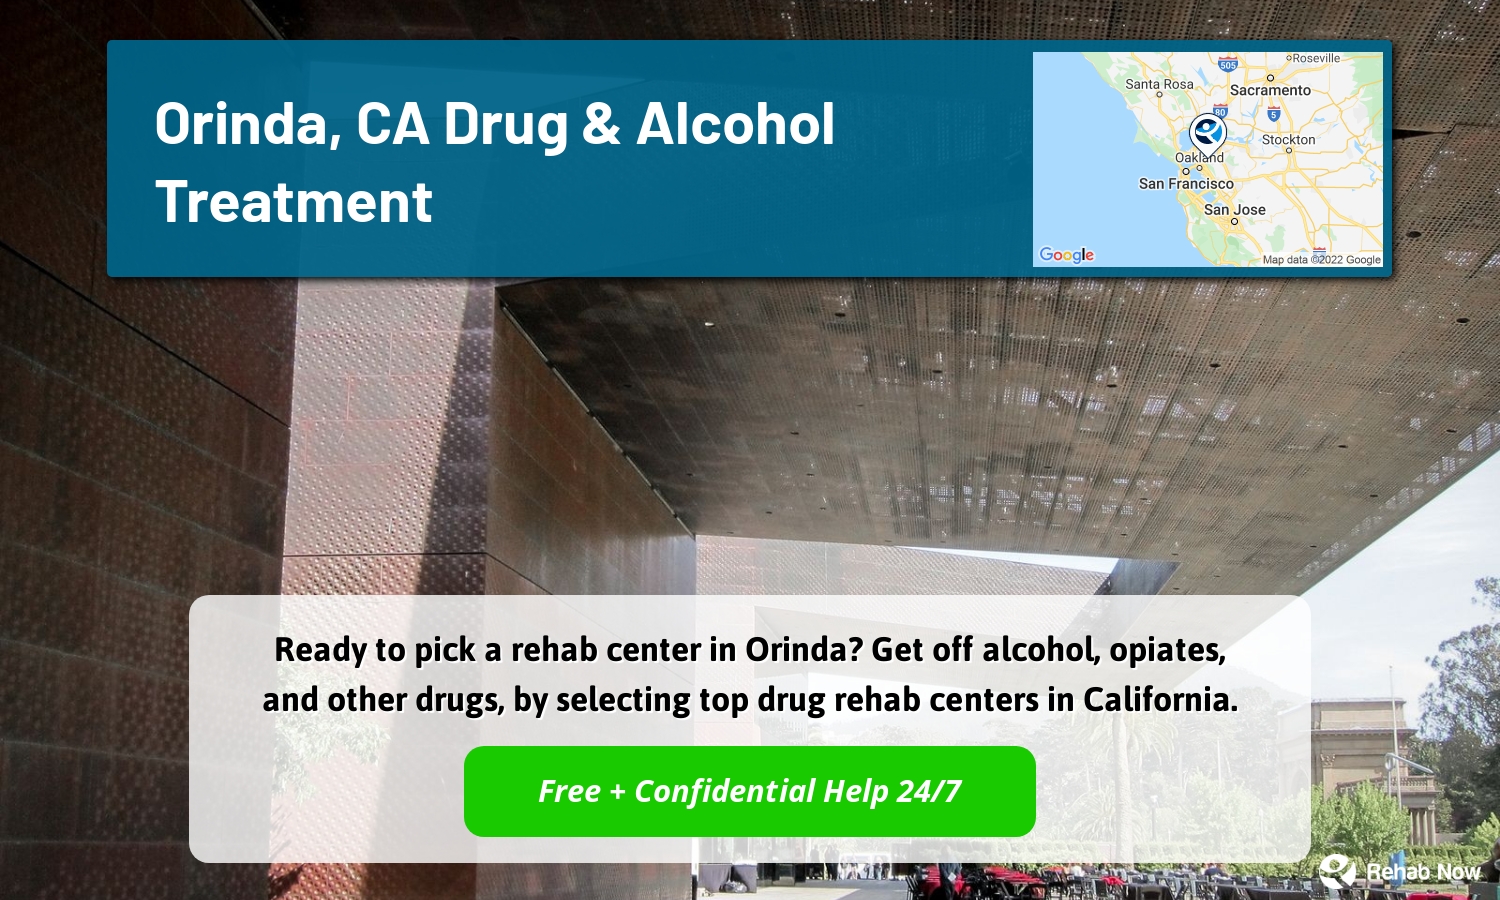 Ready to pick a rehab center in Orinda? Get off alcohol, opiates, and other drugs, by selecting top drug rehab centers in California.